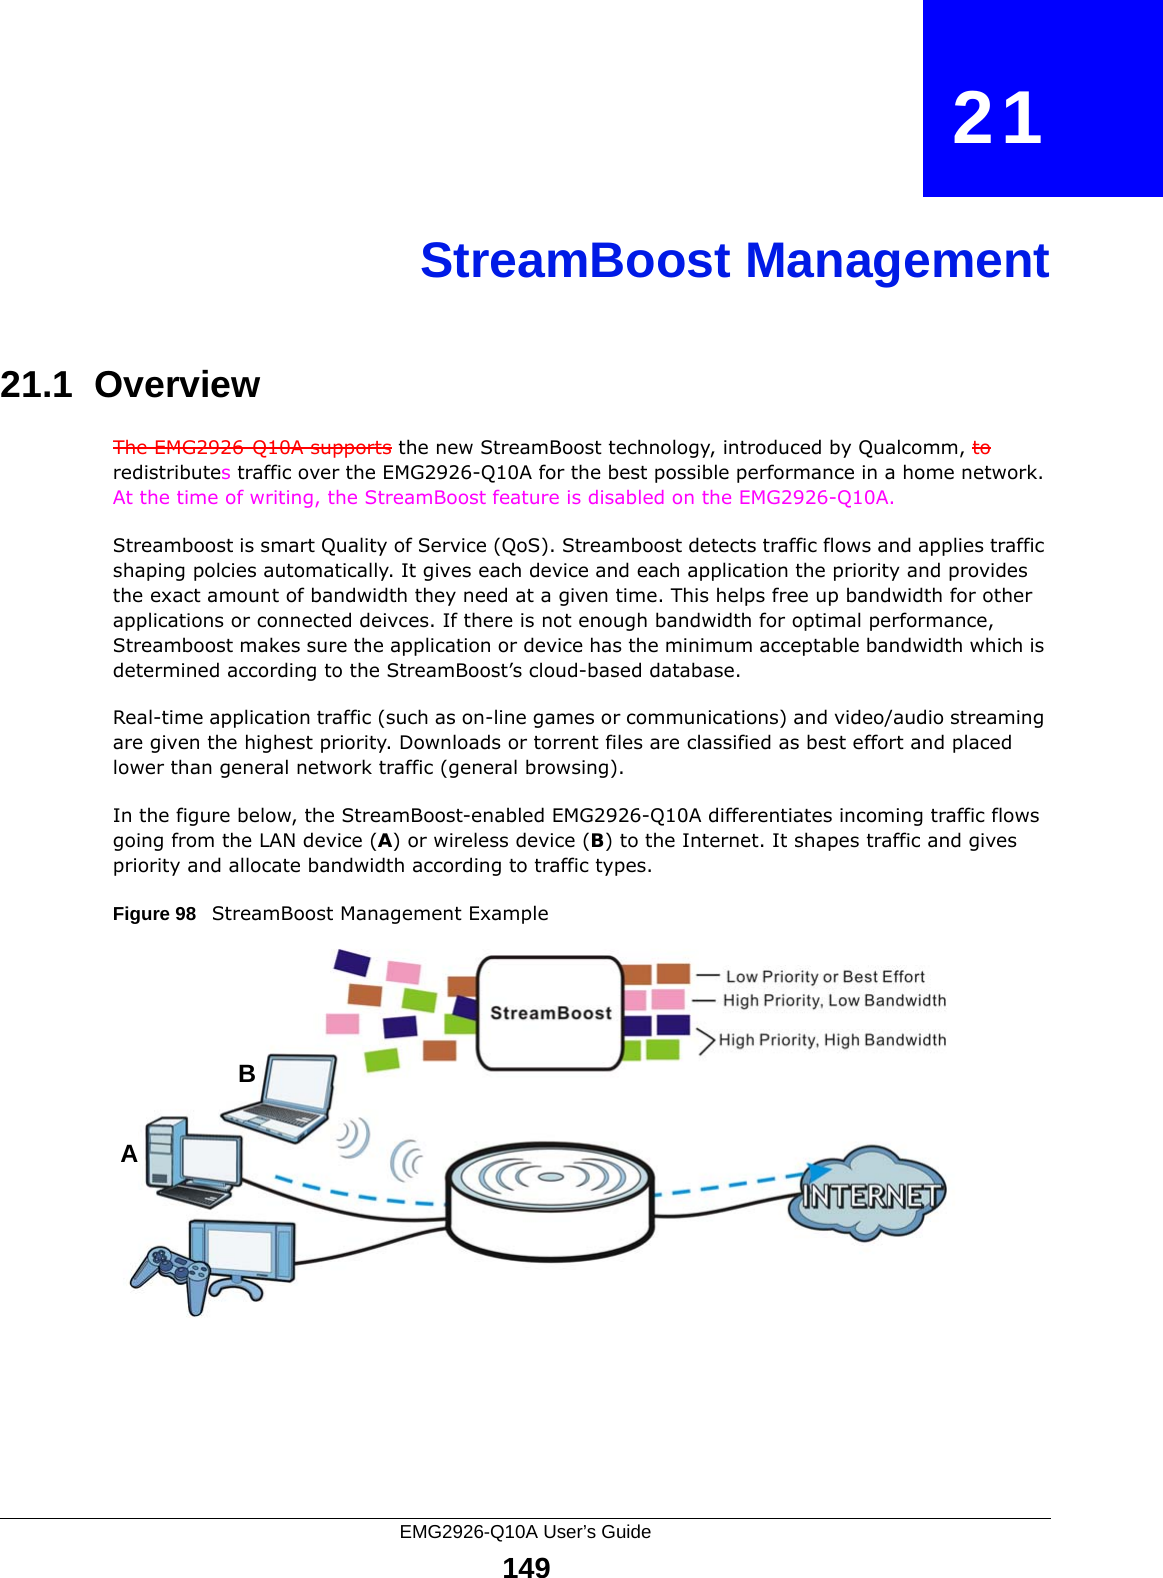 EMG2926-Q10A User’s Guide149CHAPTER   21StreamBoost Management21.1  Overview The EMG2926-Q10A supports the new StreamBoost technology, introduced by Qualcomm, to redistributes traffic over the EMG2926-Q10A for the best possible performance in a home network. At the time of writing, the StreamBoost feature is disabled on the EMG2926-Q10A. Streamboost is smart Quality of Service (QoS). Streamboost detects traffic flows and applies traffic shaping polcies automatically. It gives each device and each application the priority and provides the exact amount of bandwidth they need at a given time. This helps free up bandwidth for other applications or connected deivces. If there is not enough bandwidth for optimal performance, Streamboost makes sure the application or device has the minimum acceptable bandwidth which is determined according to the StreamBoost’s cloud-based database. Real-time application traffic (such as on-line games or communications) and video/audio streaming are given the highest priority. Downloads or torrent files are classified as best effort and placed lower than general network traffic (general browsing).In the figure below, the StreamBoost-enabled EMG2926-Q10A differentiates incoming traffic flows going from the LAN device (A) or wireless device (B) to the Internet. It shapes traffic and gives priority and allocate bandwidth according to traffic types.Figure 98   StreamBoost Management ExampleAB